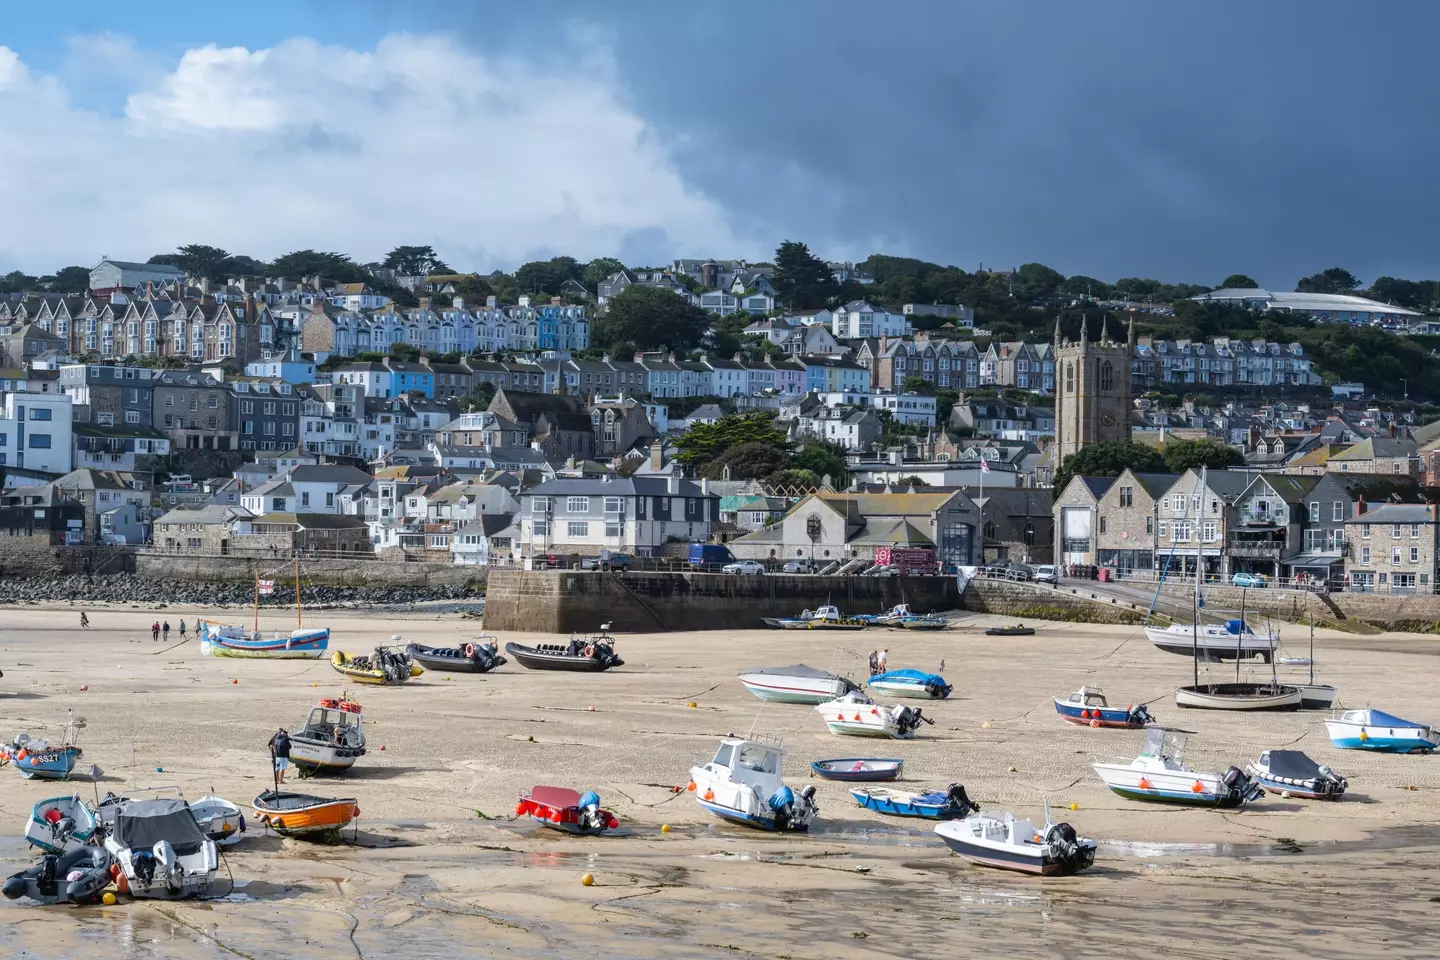 St. Ives, Cornwall, topped the list.